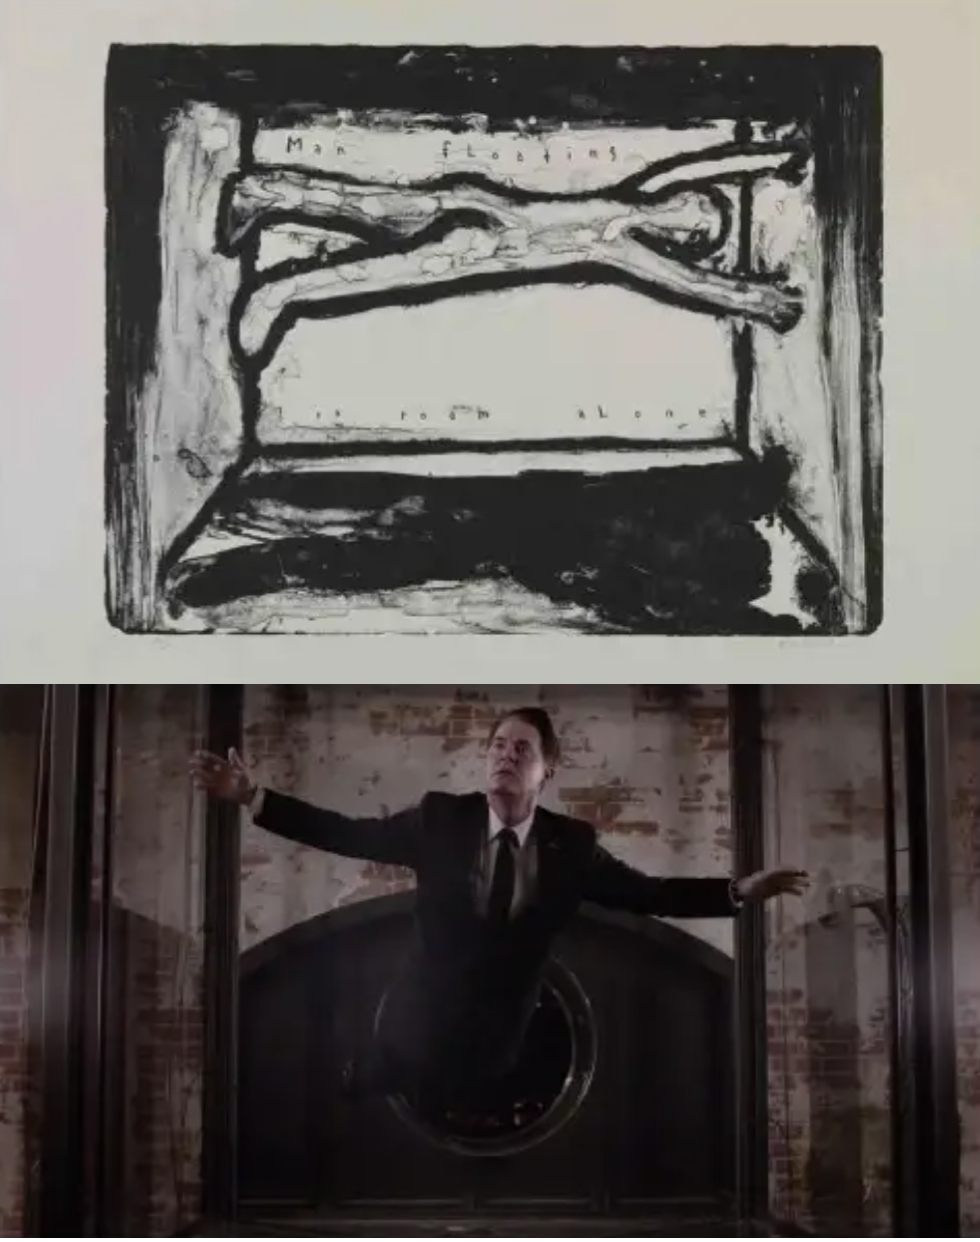 Top: a drawing of a man floating in a room. Bottom: Dale Cooper floating in the Glass Box.